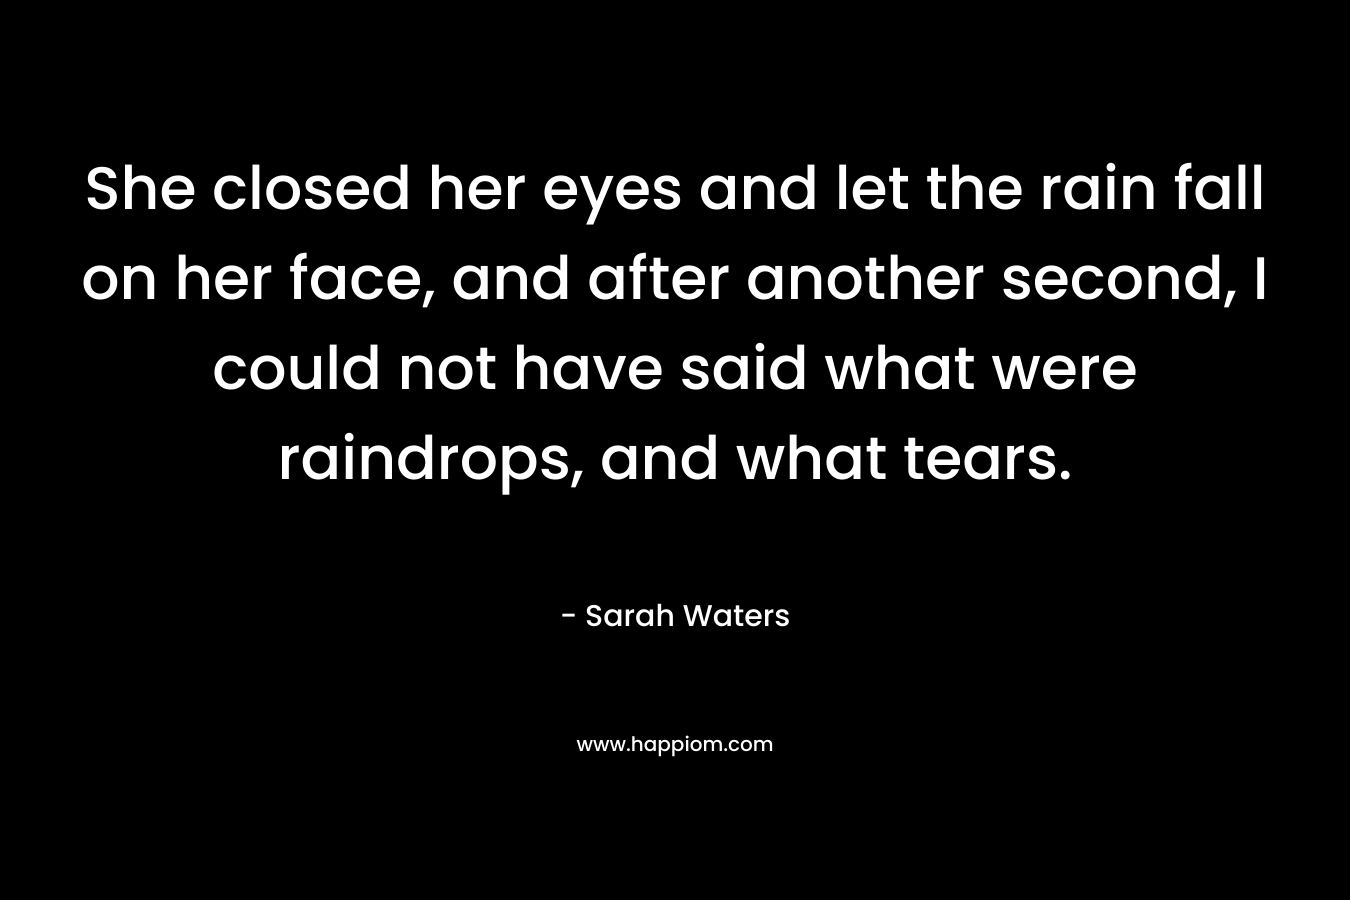 She closed her eyes and let the rain fall on her face, and after another second, I could not have said what were raindrops, and what tears.